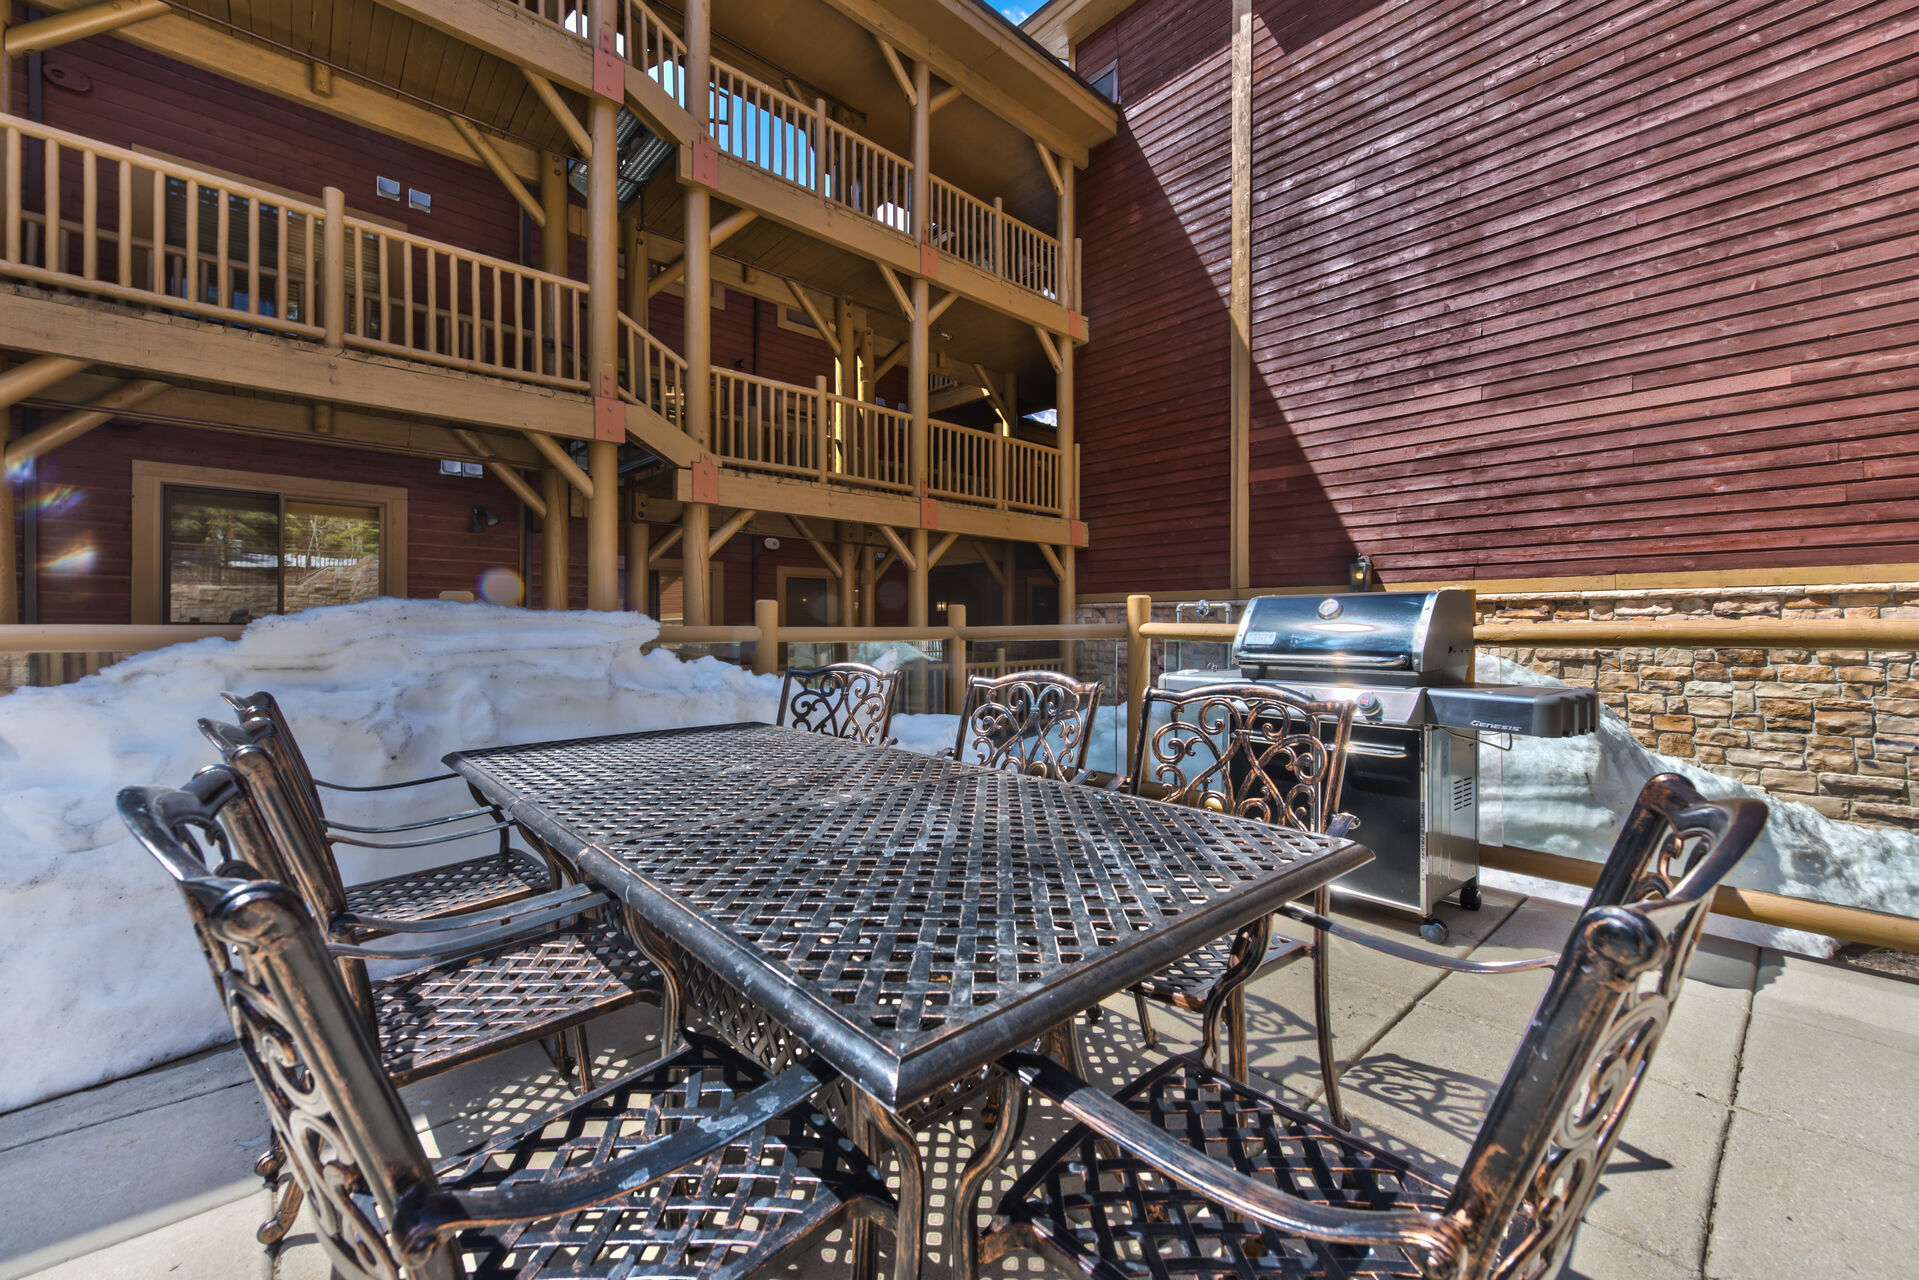 Black Bear Lodge Communal Barbecue Grill and Seating by Pool